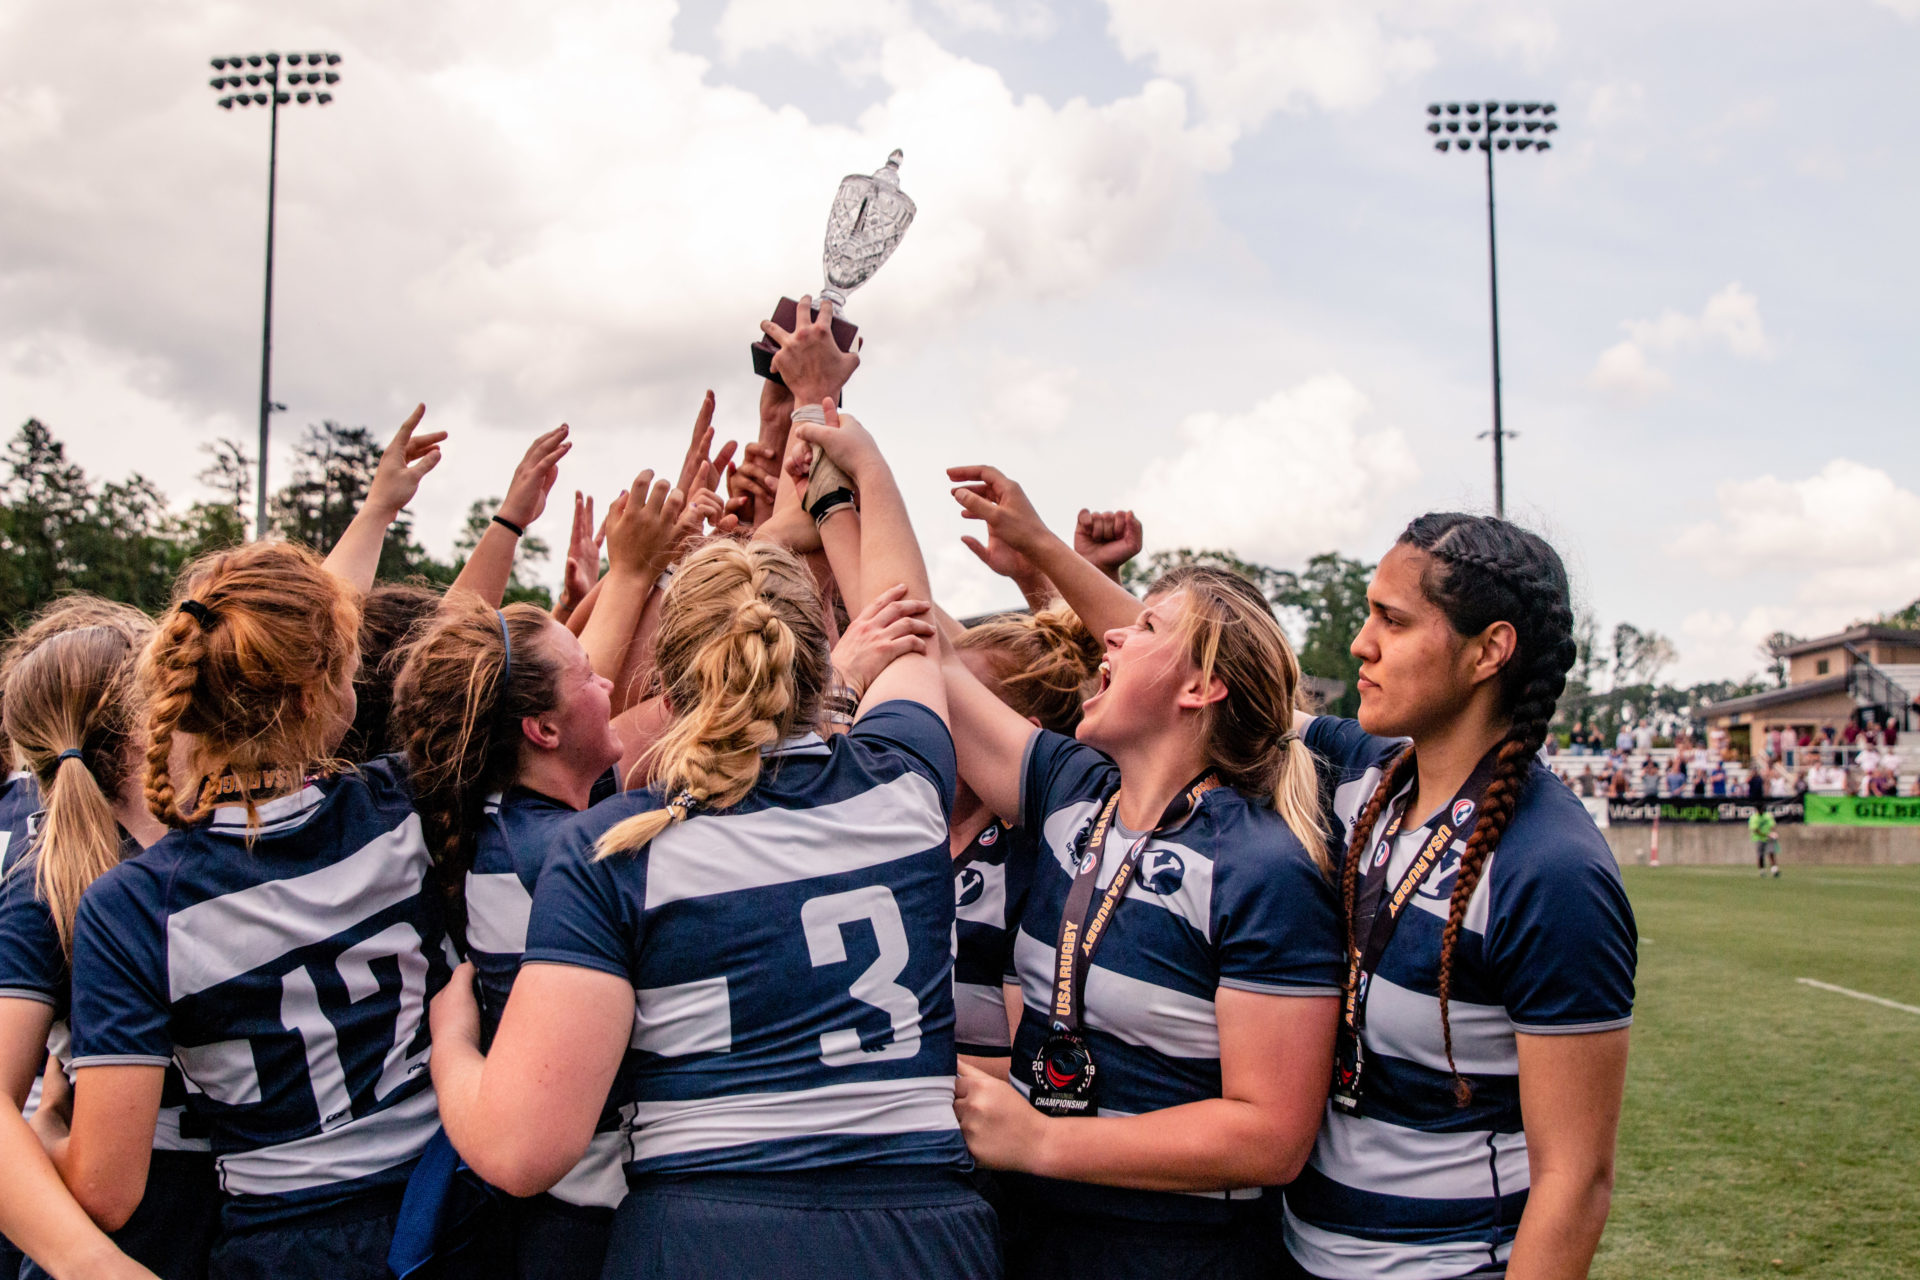 Triumph of the Spirit — BYU women's rugby wins national championship